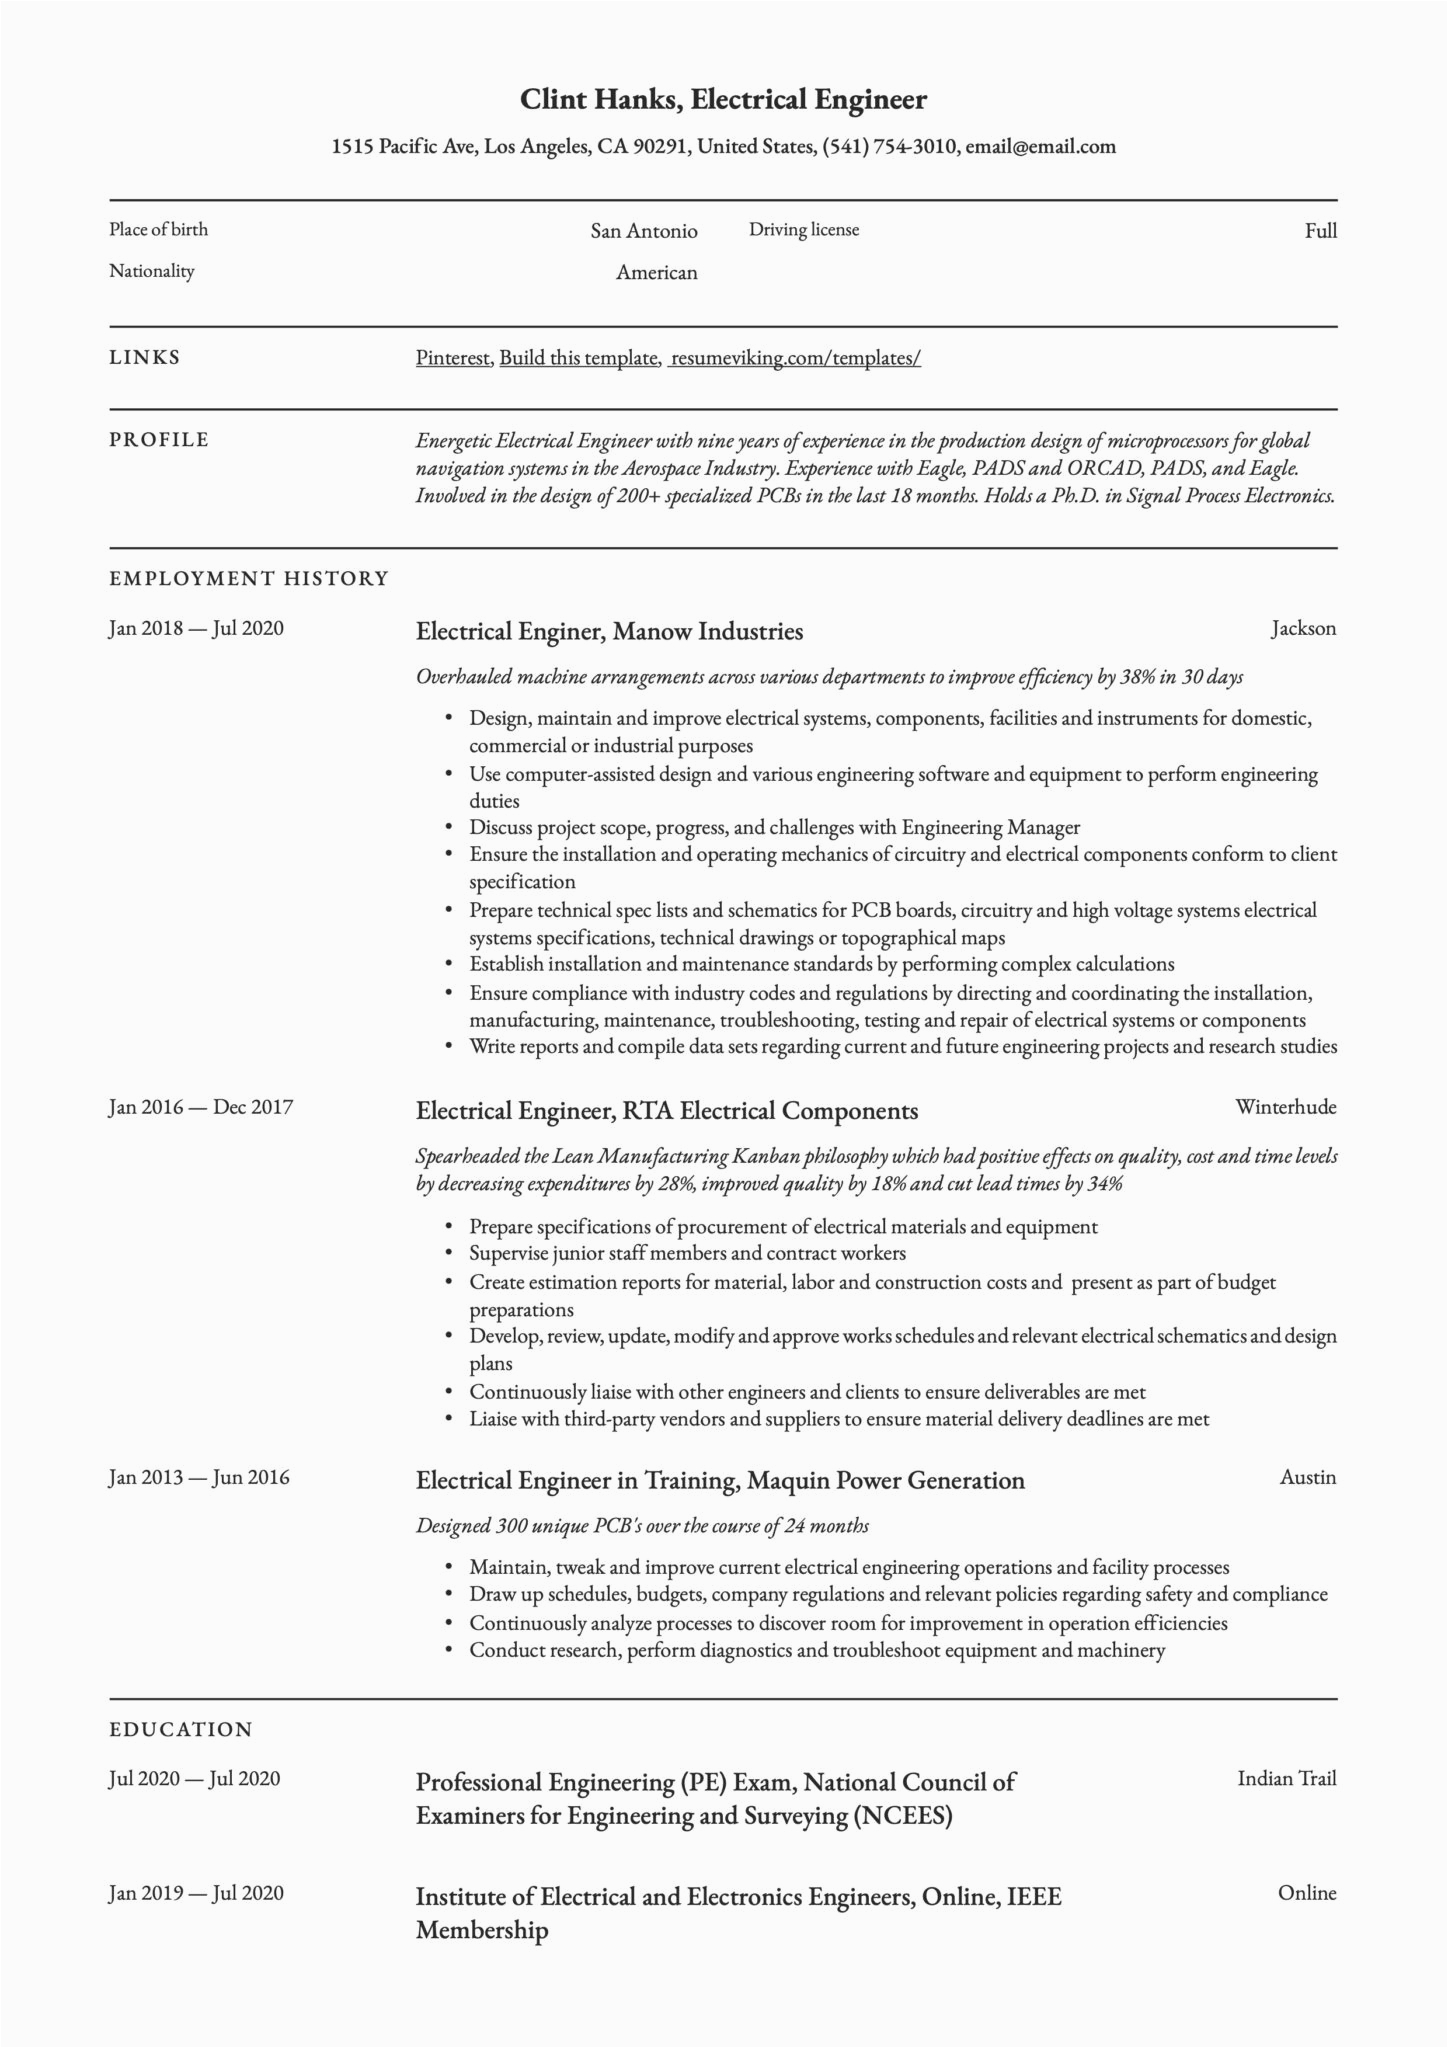 Free Resume Templates for Electrical Engineers Electrical Engineer Resume & Writing Guide